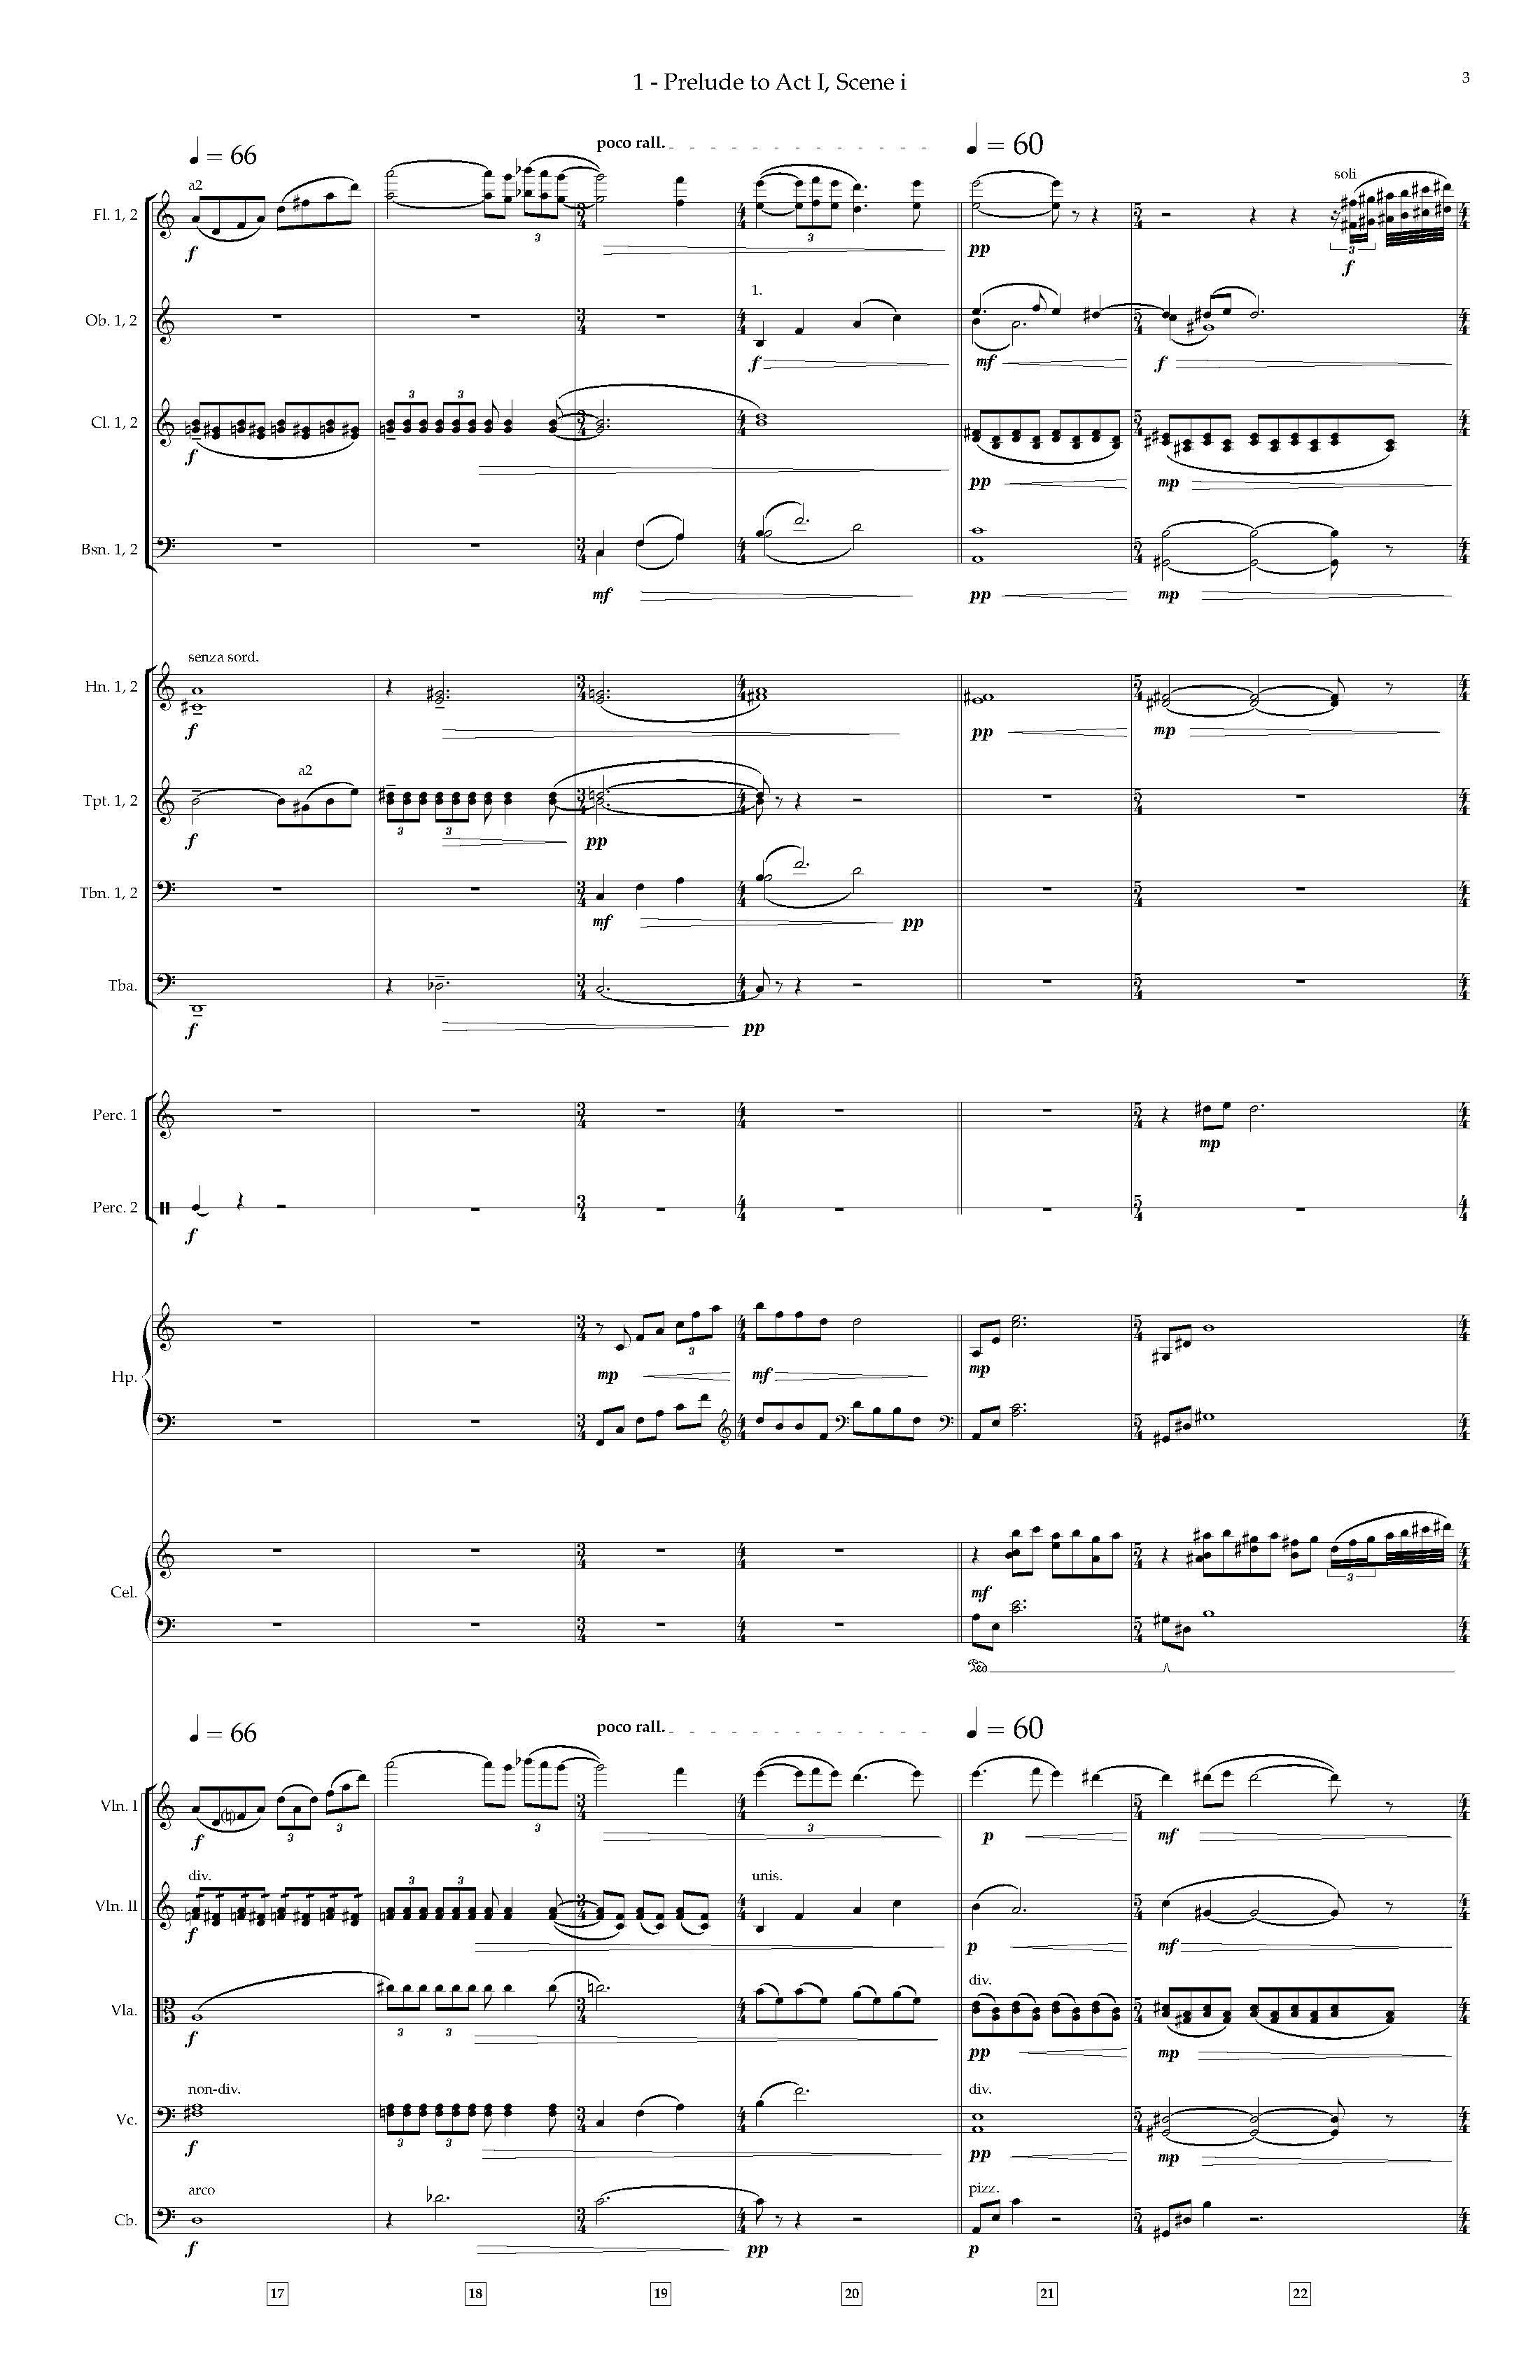 Arias and Interludes from HWGS - Complete Score_Page_09.jpg